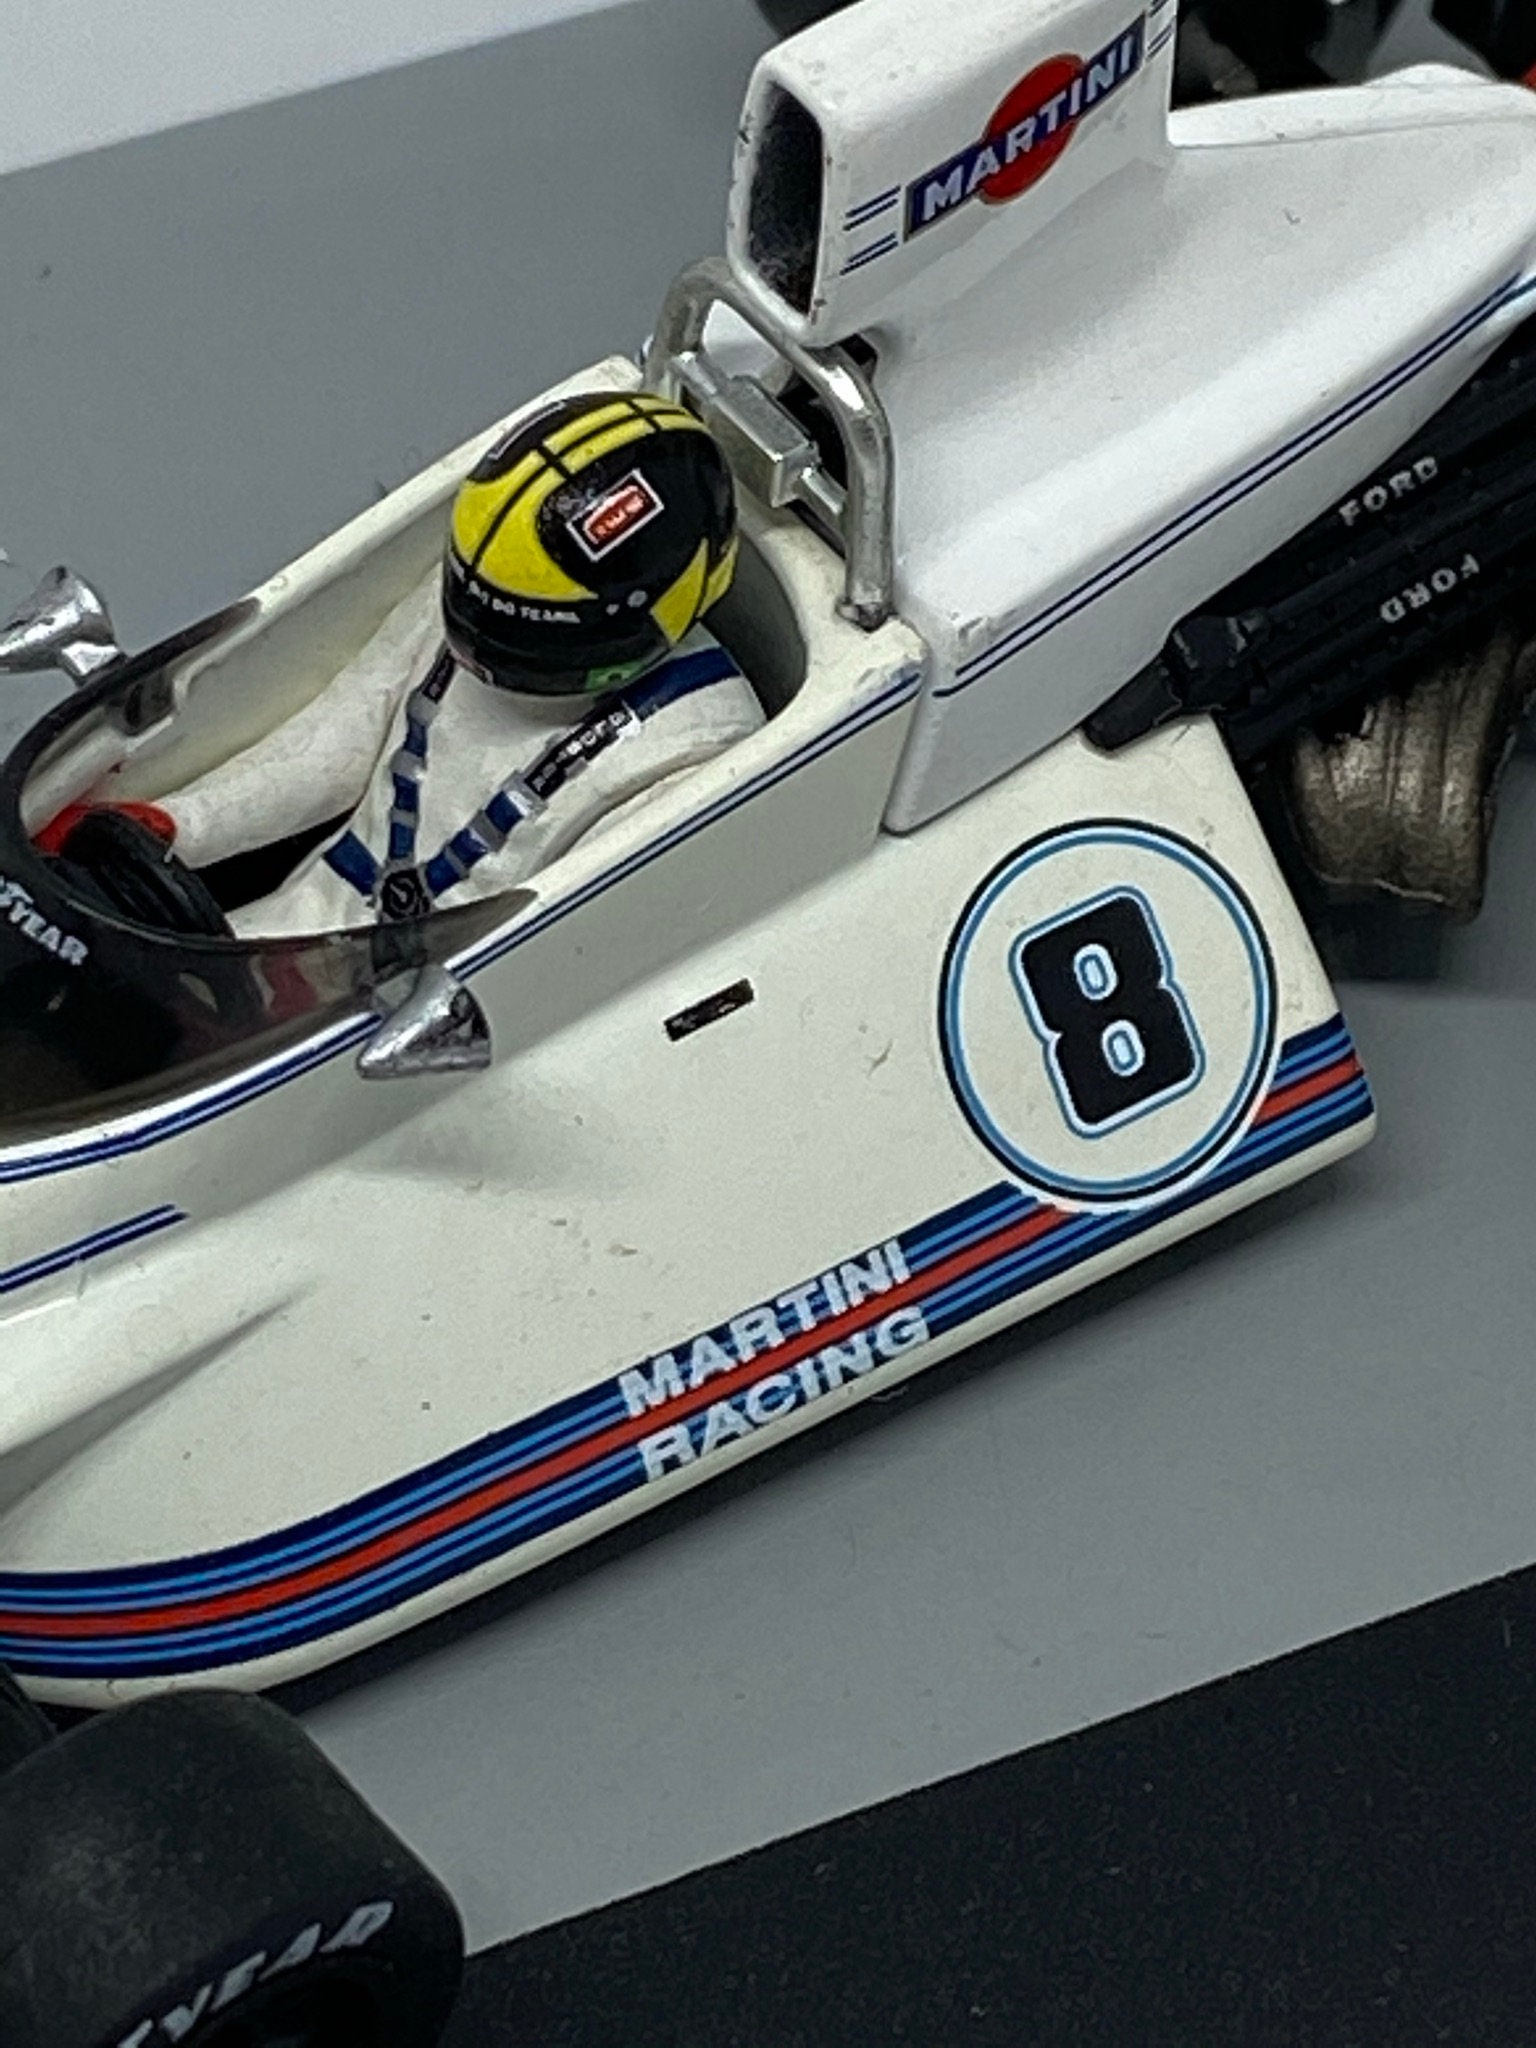 1:43 Scale Model of a Brabham BT44B F1 Car as Raced by Carlos Pace in the  1975 Brazilian Grand Prix 